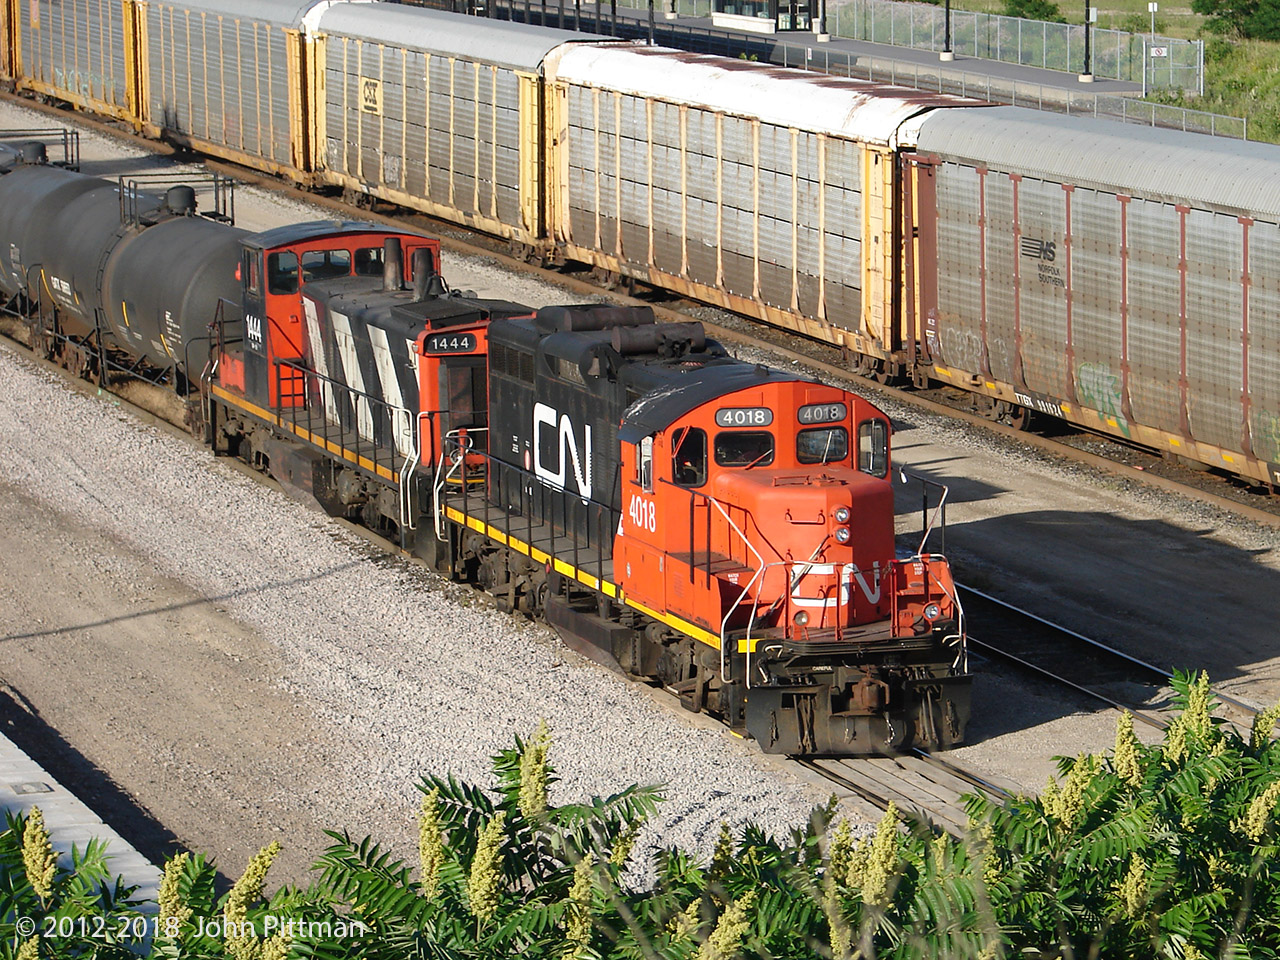 Lighter-weight GP9rm CN 4018 and GMD1 CN 1444 have paused in the afternoon sun with a bouquet of Sumach.  The 4000's are a lot rarer than other CN GP9rm locomotives in my area.  According to Canadian Trackside Guide they are 9000 lb lighter than the other GP9rm's, a 3.5% reduction from the usual 257,000 lb, which could make a difference on lighter rail.  
My photo archive shows that lower number GP9rm's in all series (4000's, 4100's, 7000's, and 7200's) retained the cylindrical CN GP9 exhaust spark arrestors as seen on 4018, but higher number units did not have them.